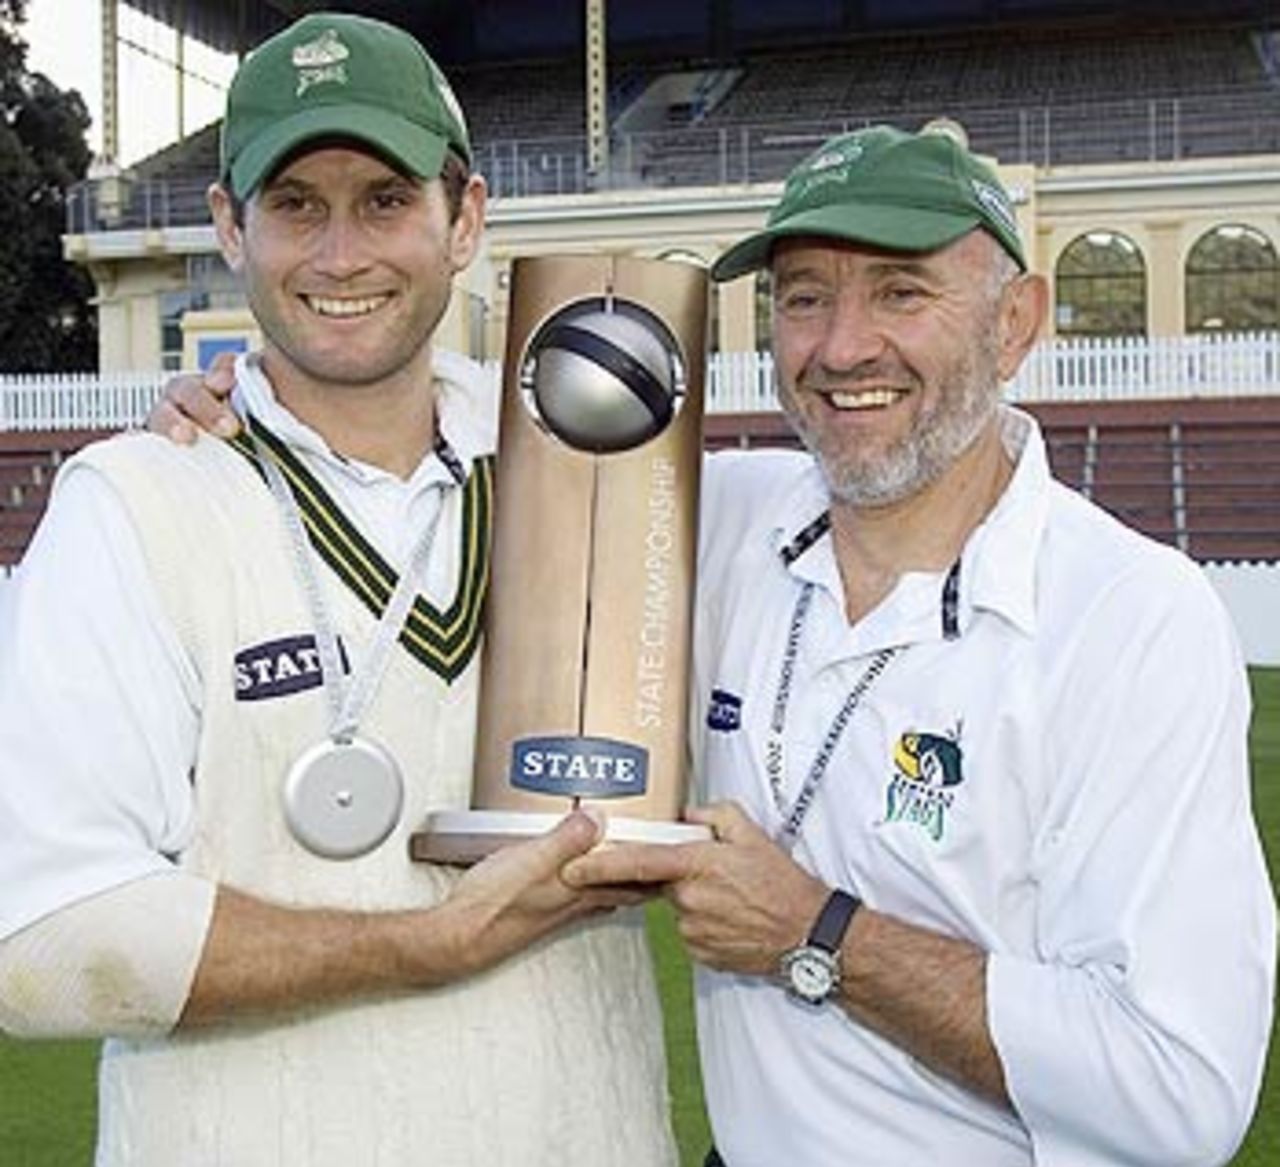 Jarrod Englefield and Graham Barlow of Central Districts hold the State Championship cricket trophy, Wellington v Central Districts, State Championship final, Basin Reserve,  April 7, 2006